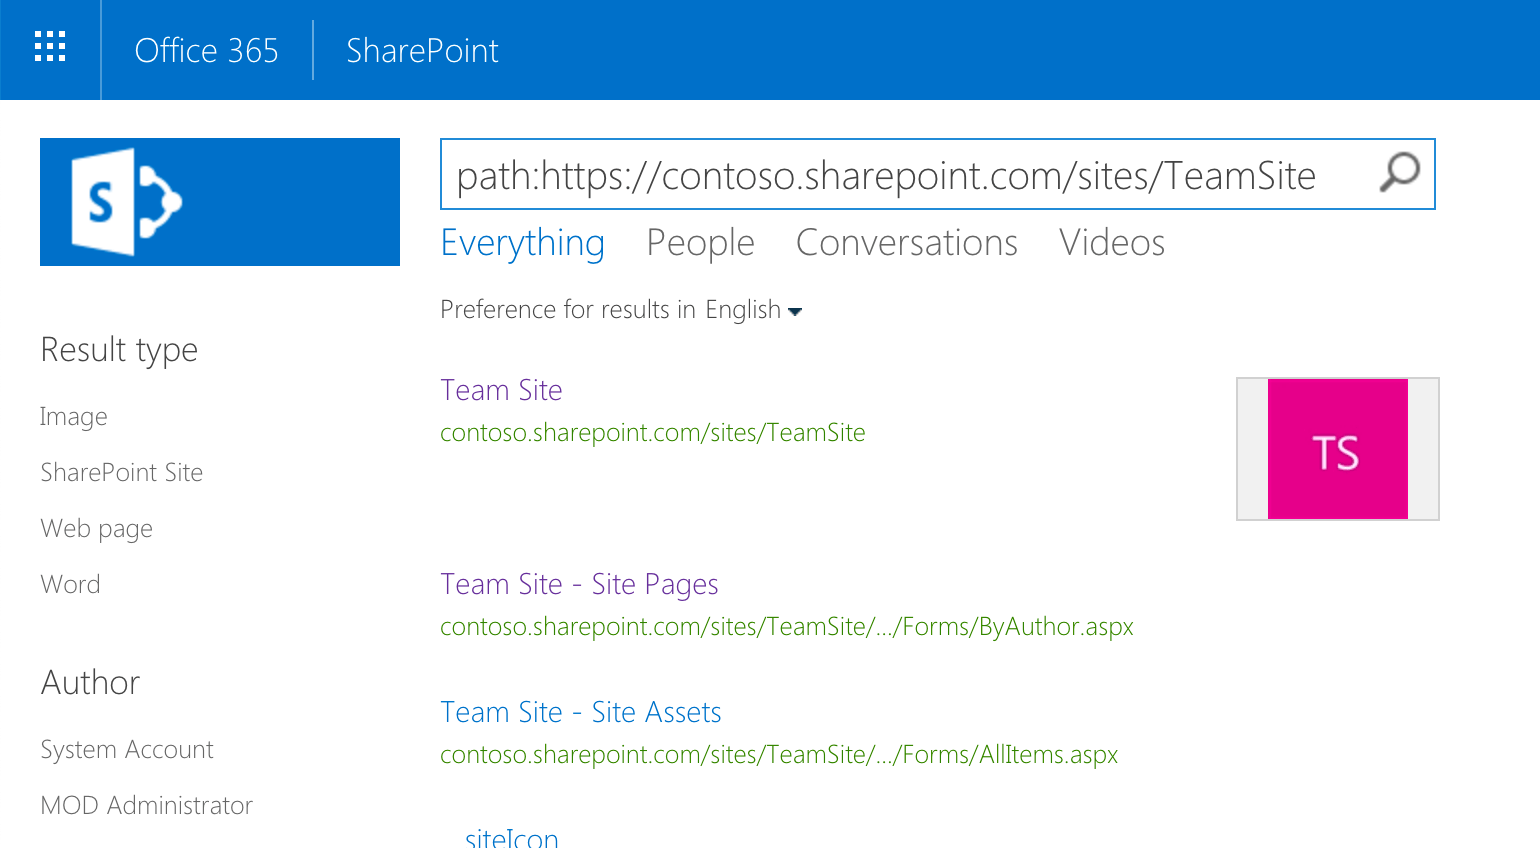 Information from the modern Team Site returned in SharePoint search results